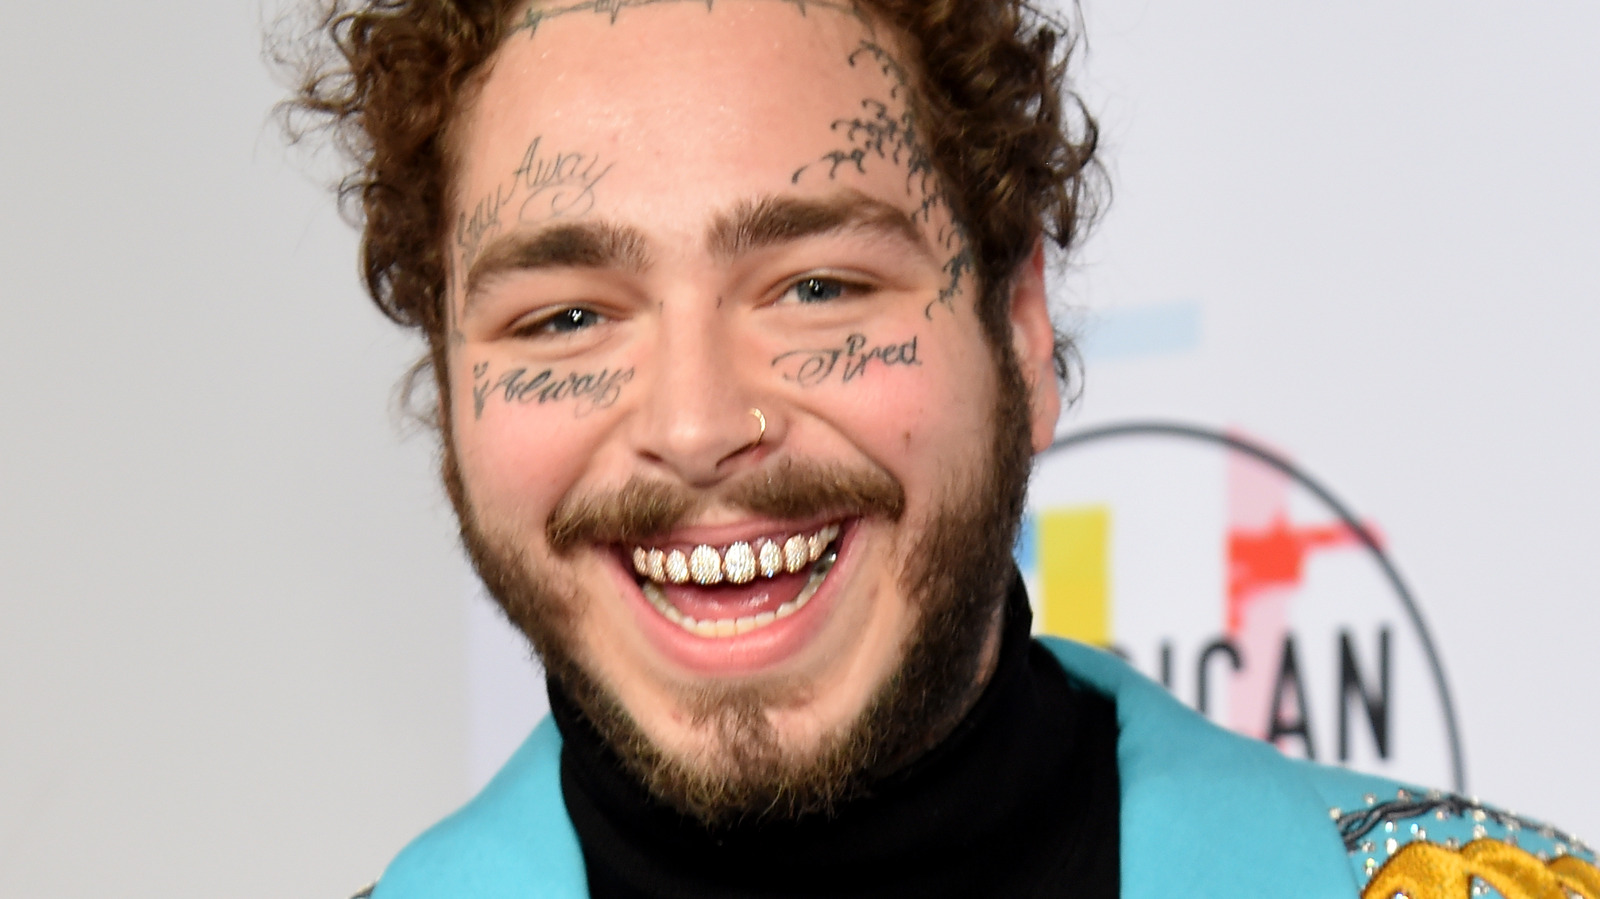 A Complete List Of (Pretty Much) Every Tattoo On Post Malone's Face & Body  | Post malone, Hidden tattoos, Tattoos